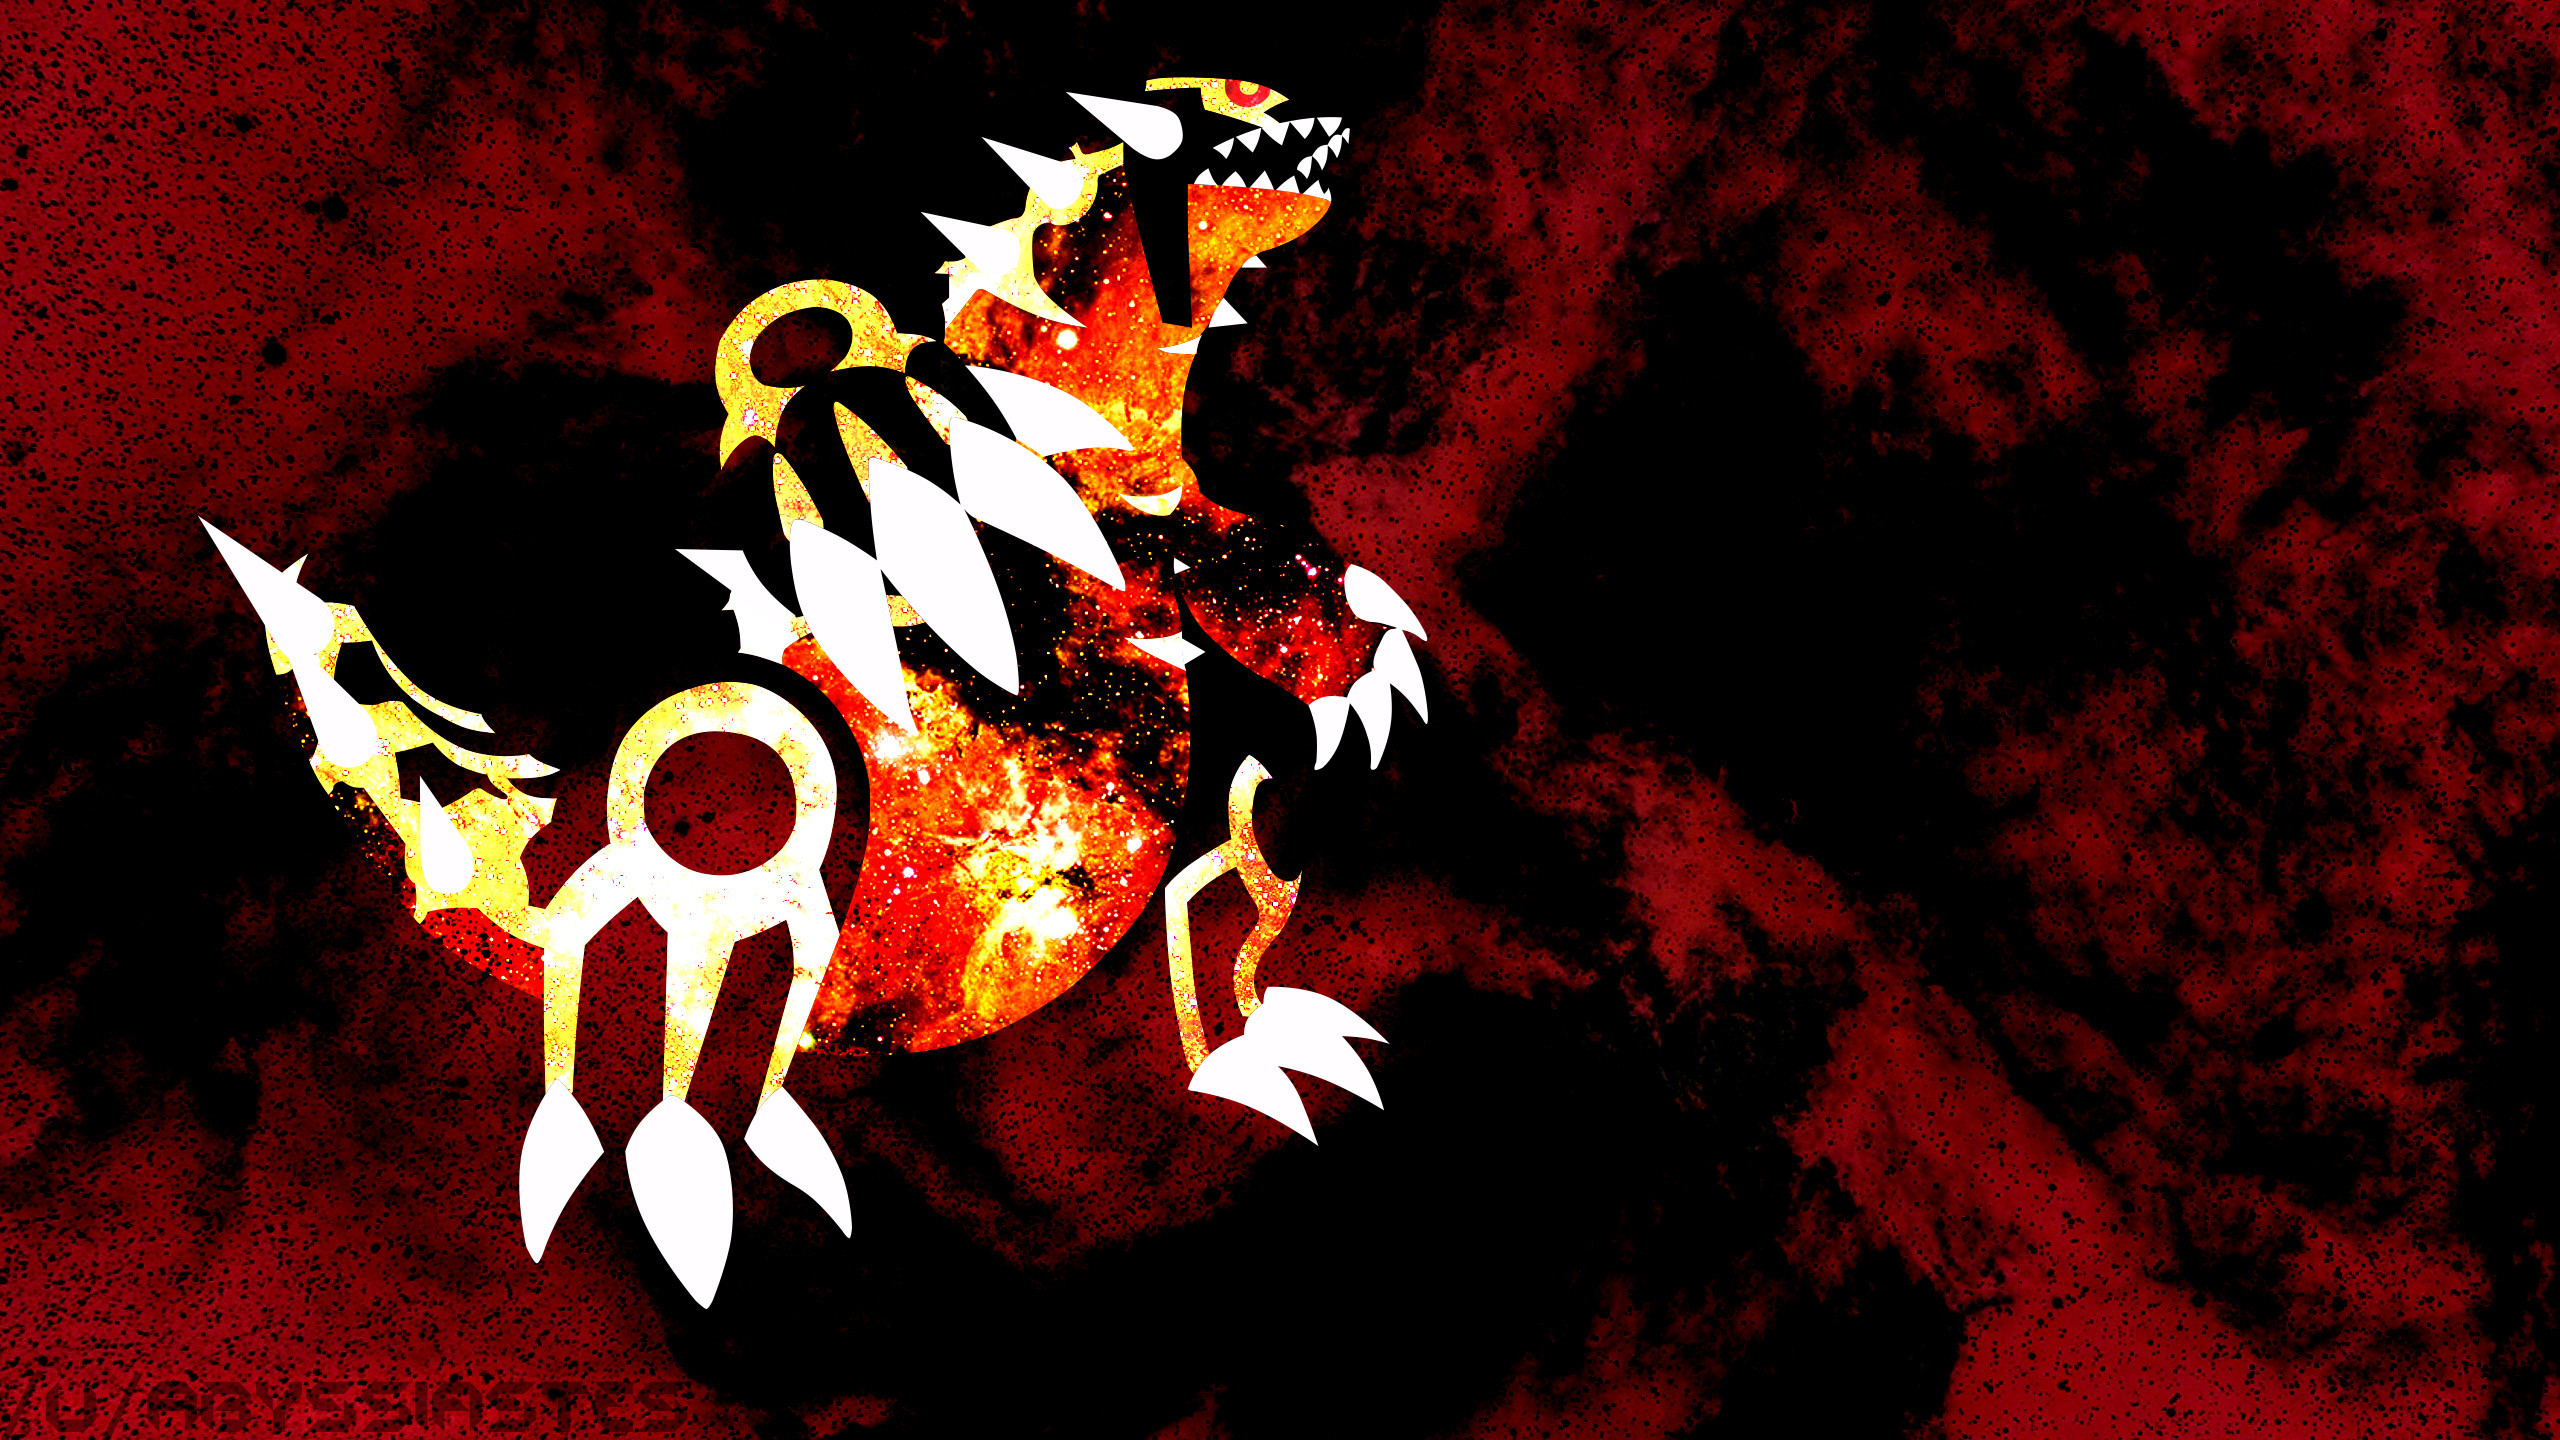 2560x1440 Primal Groudon Wallpaper The background pictures have